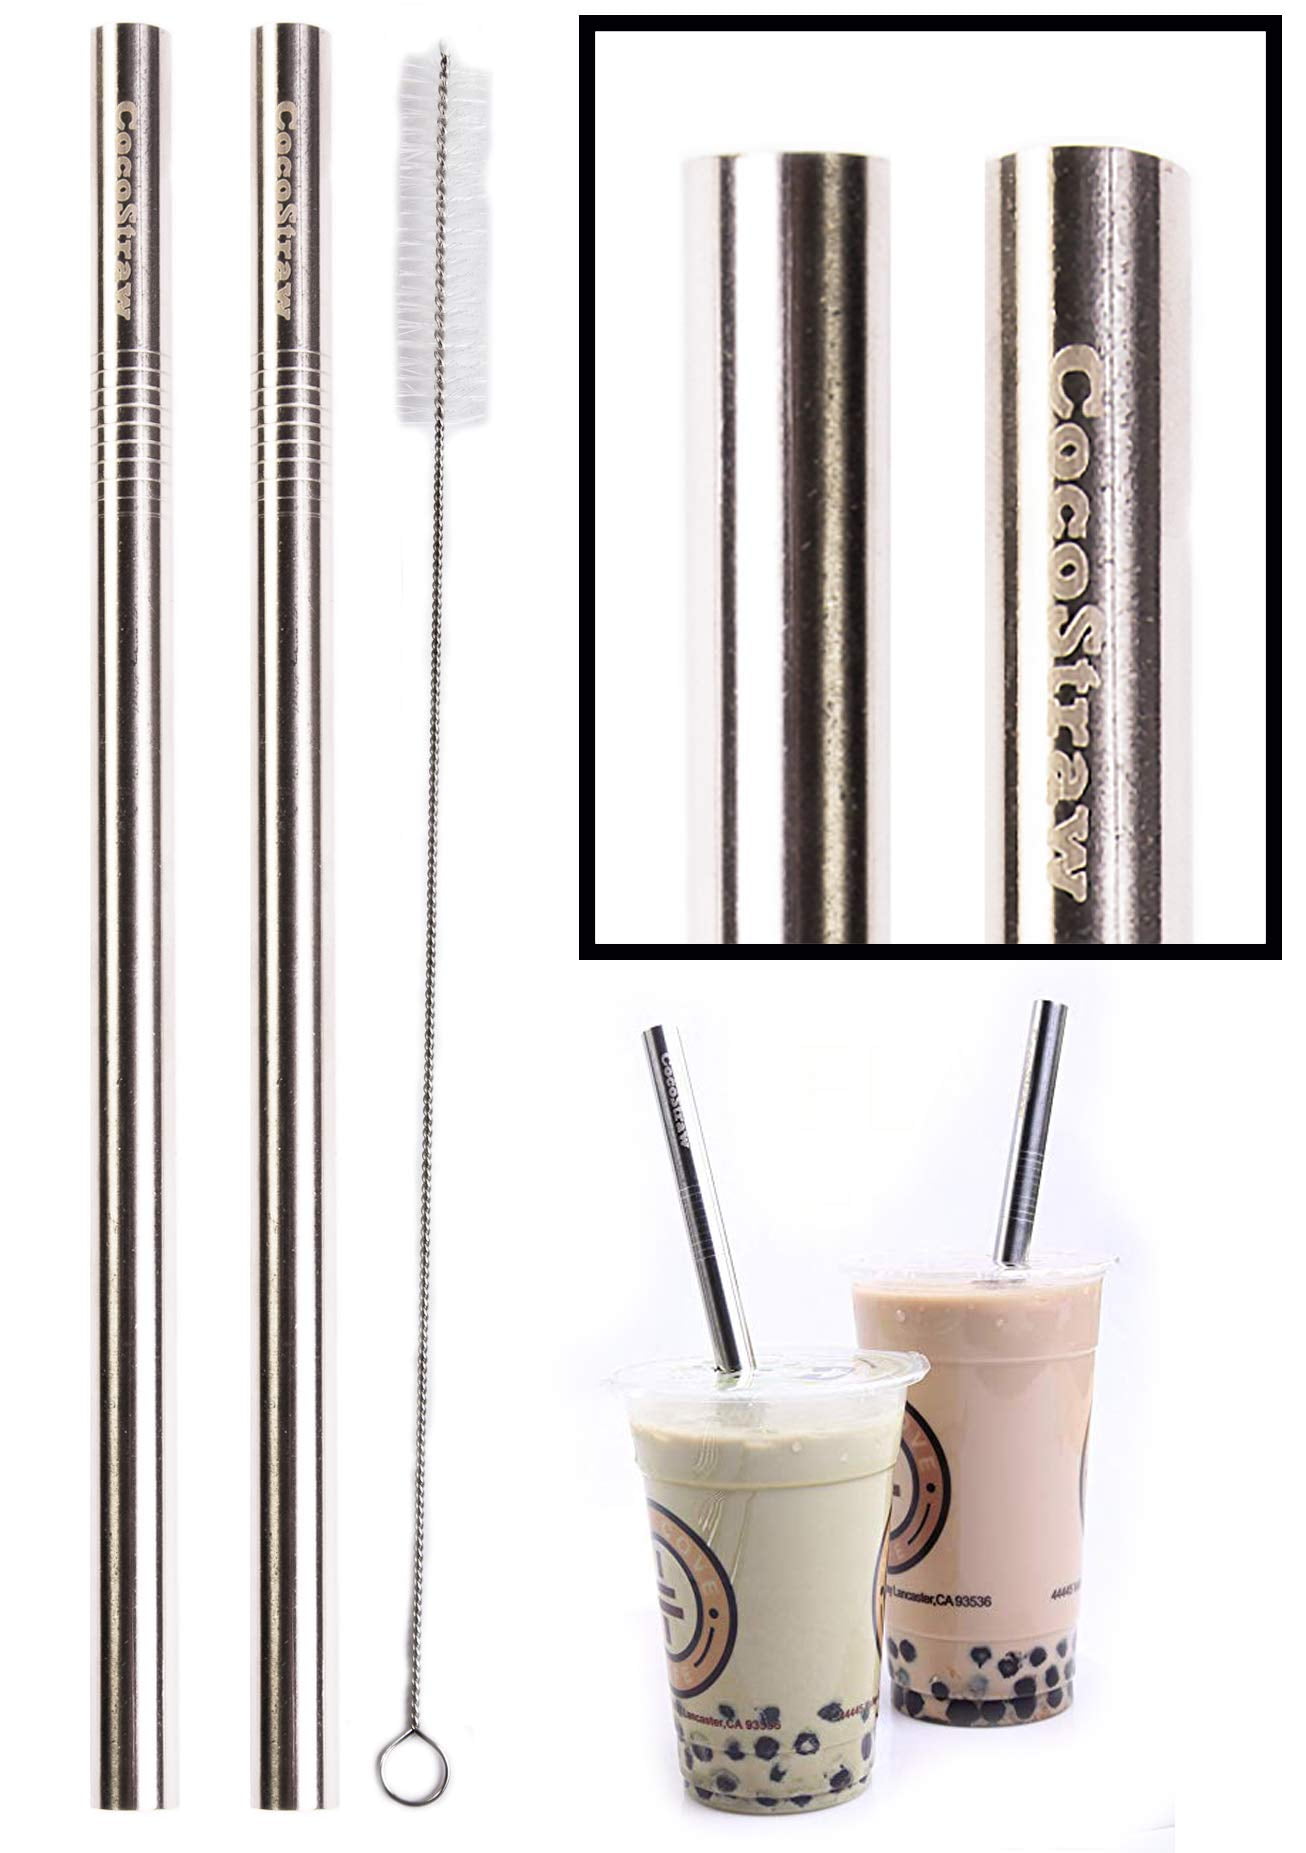 Reusable Metal Boba Straws & Black Smoothie Straws 50Pack.NiceCaTeLe 0.5  Wide Jumbo Stainless Steel Fat Straws in Bulk for Bubble Tea/Tapioca Pearl